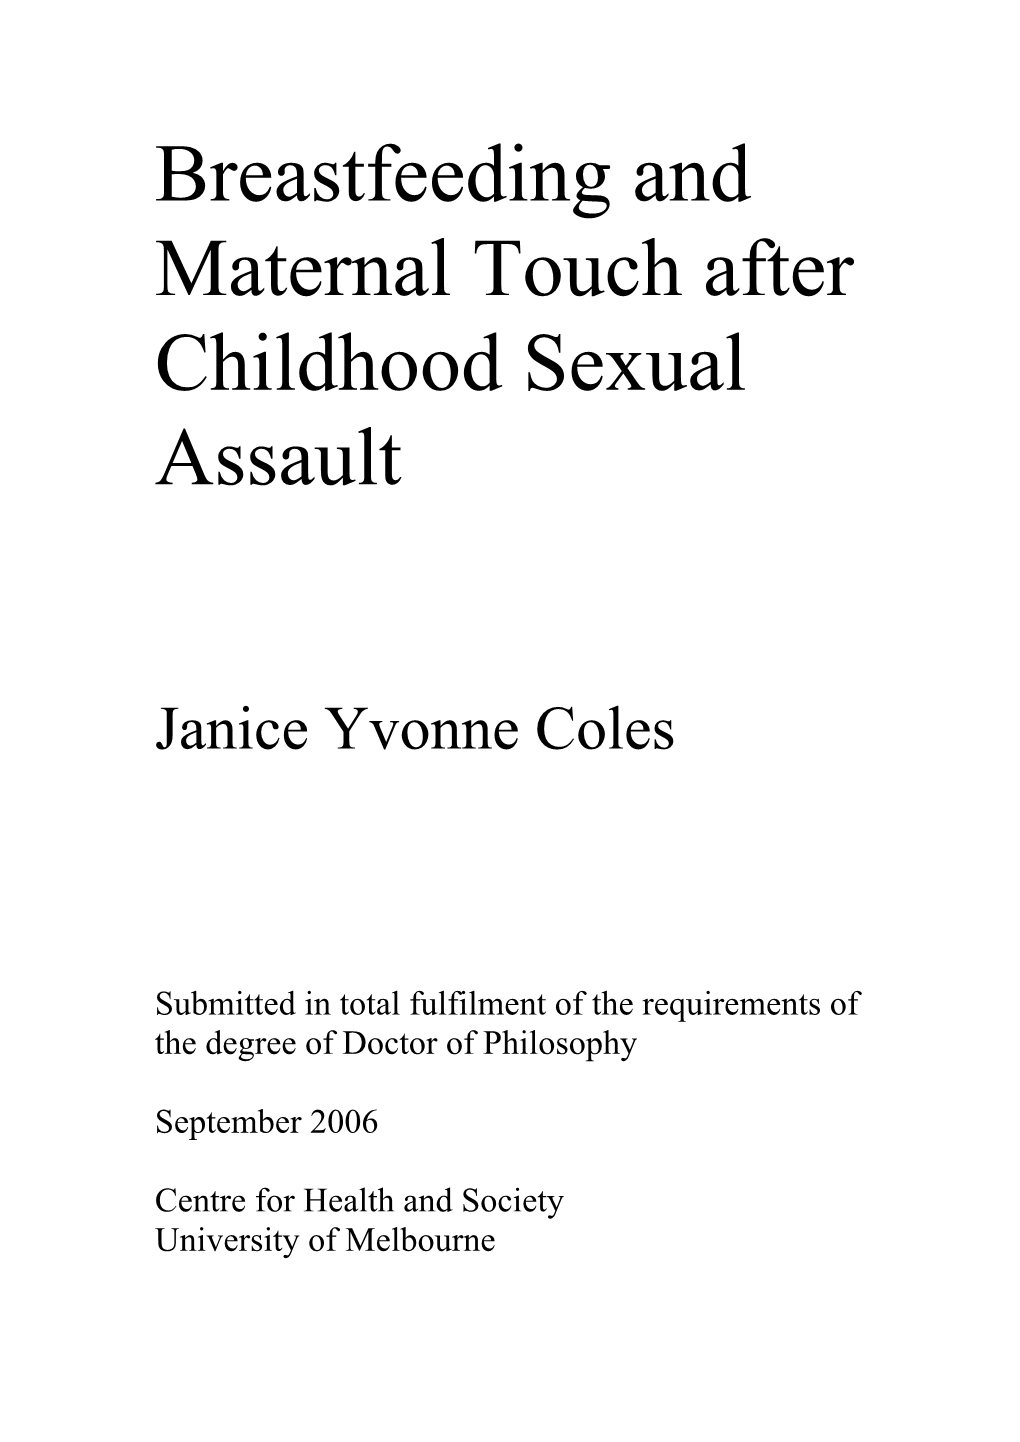 Breastfeeding and Maternal Touch After Childhood Sexual Assault